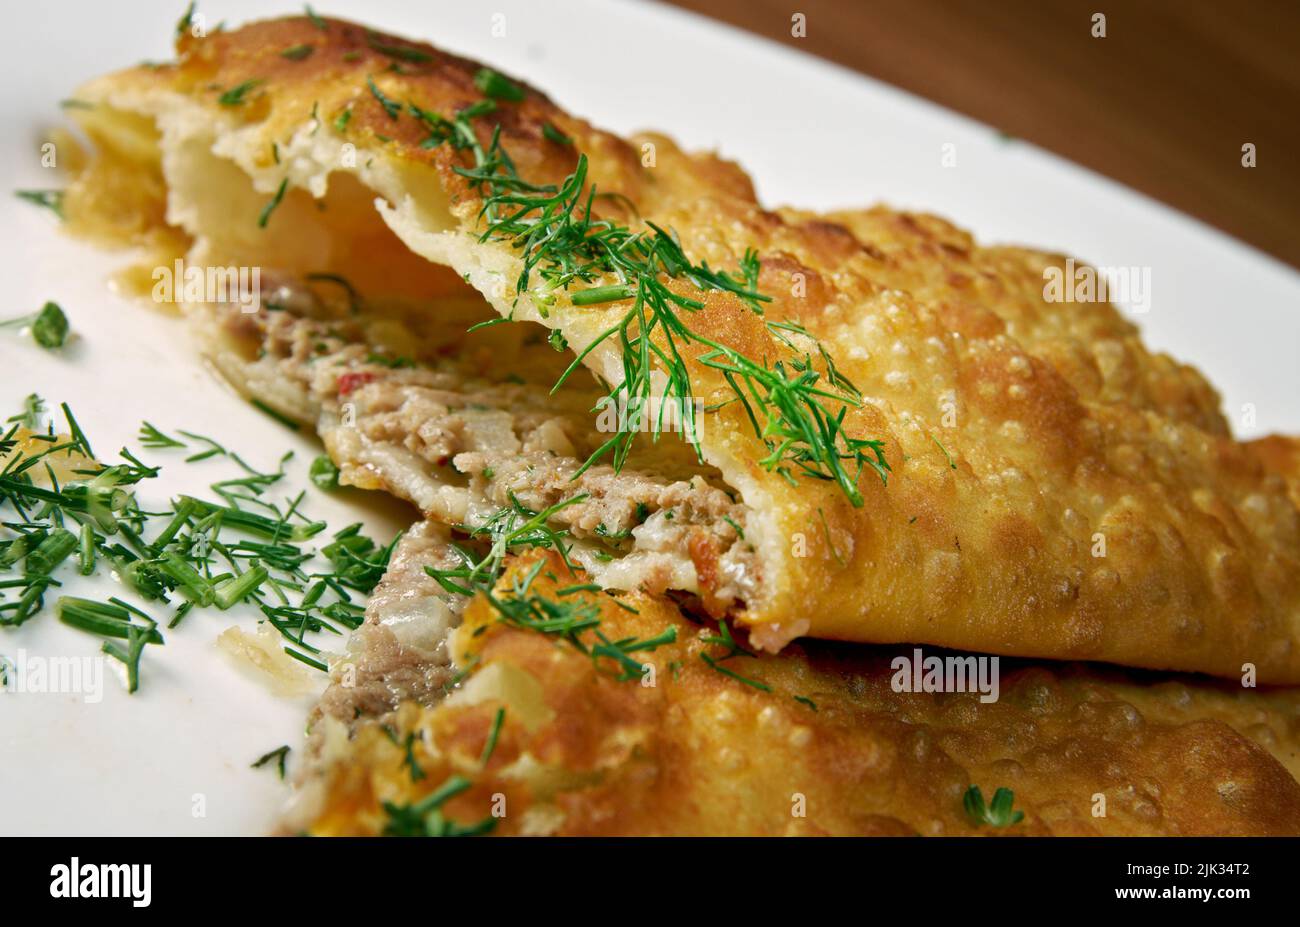 Tunisian Brik -north African version of borek, a stuffed filo pastry which is commonly deep fried. Stock Photo